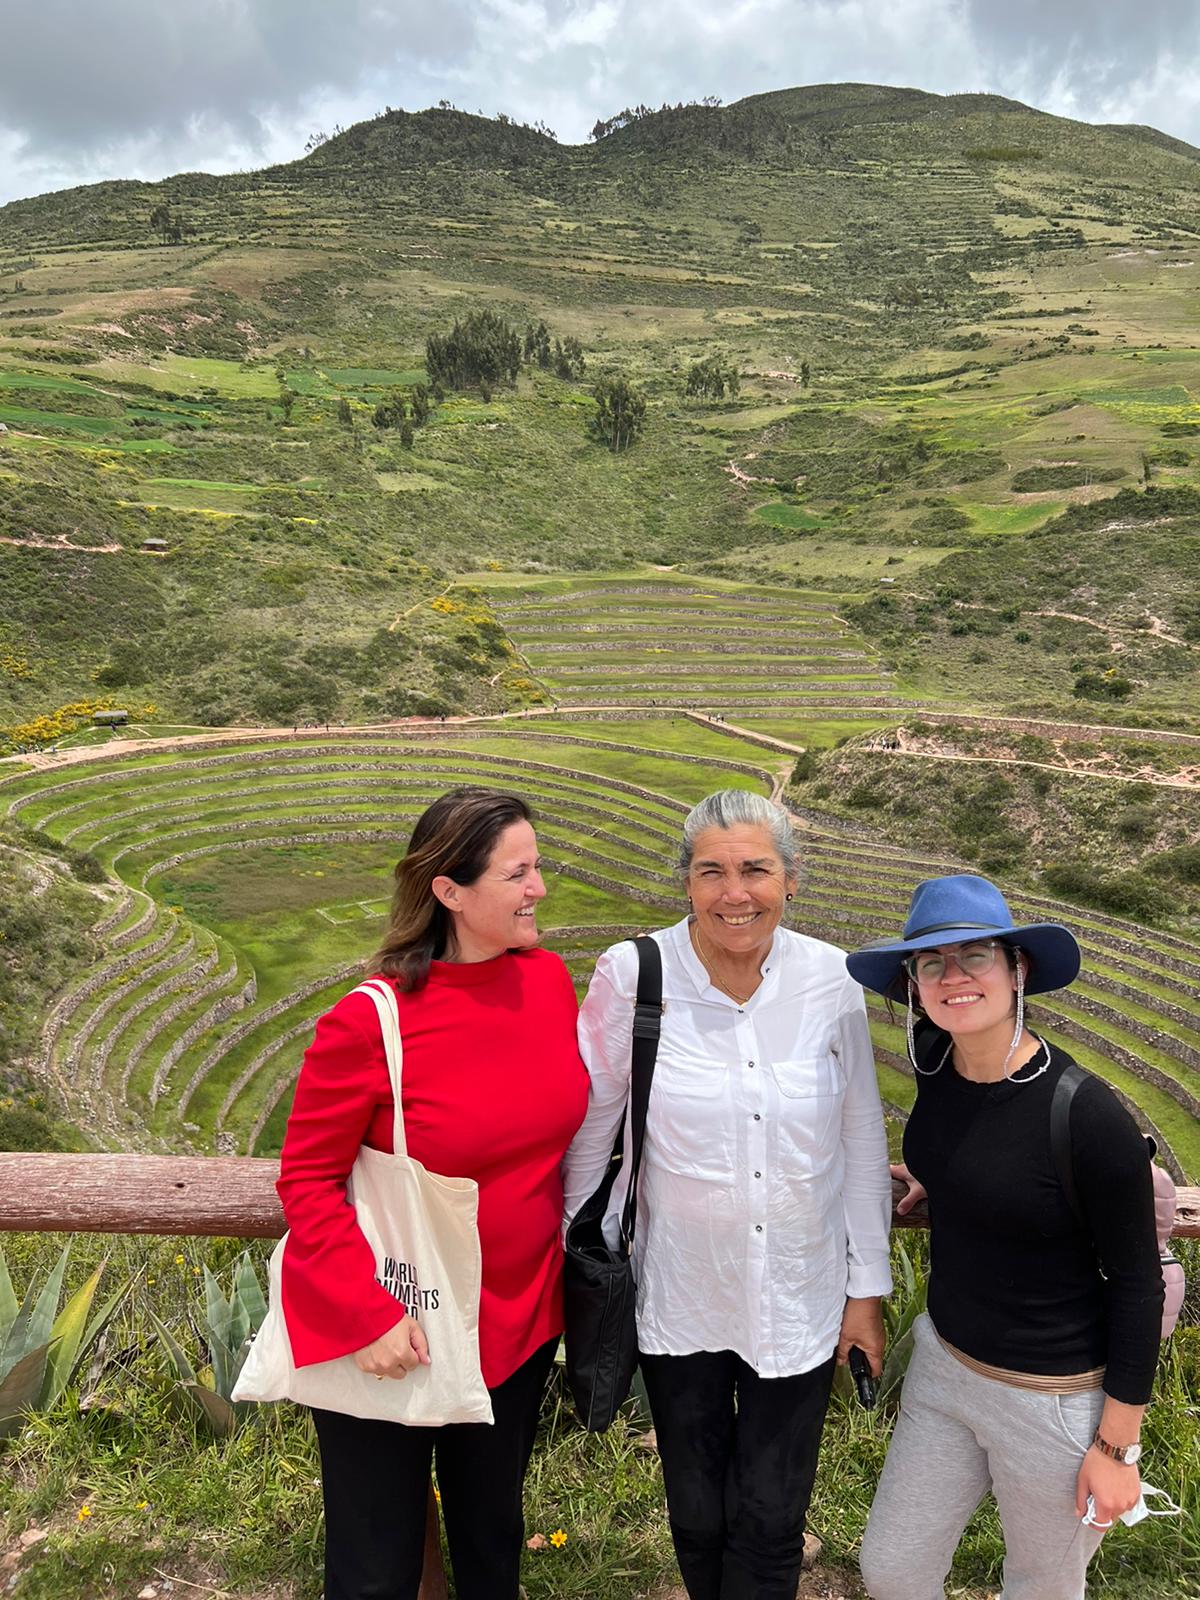 Bénédicte de Montlaur, WMF President and CEO, Martha Zegarra, Vice-President of WMF Peru, and Renata Tavara, Project Coordinator of WMF Peru at the archaeological site of Moray in the Sacred Valley of the Incas.